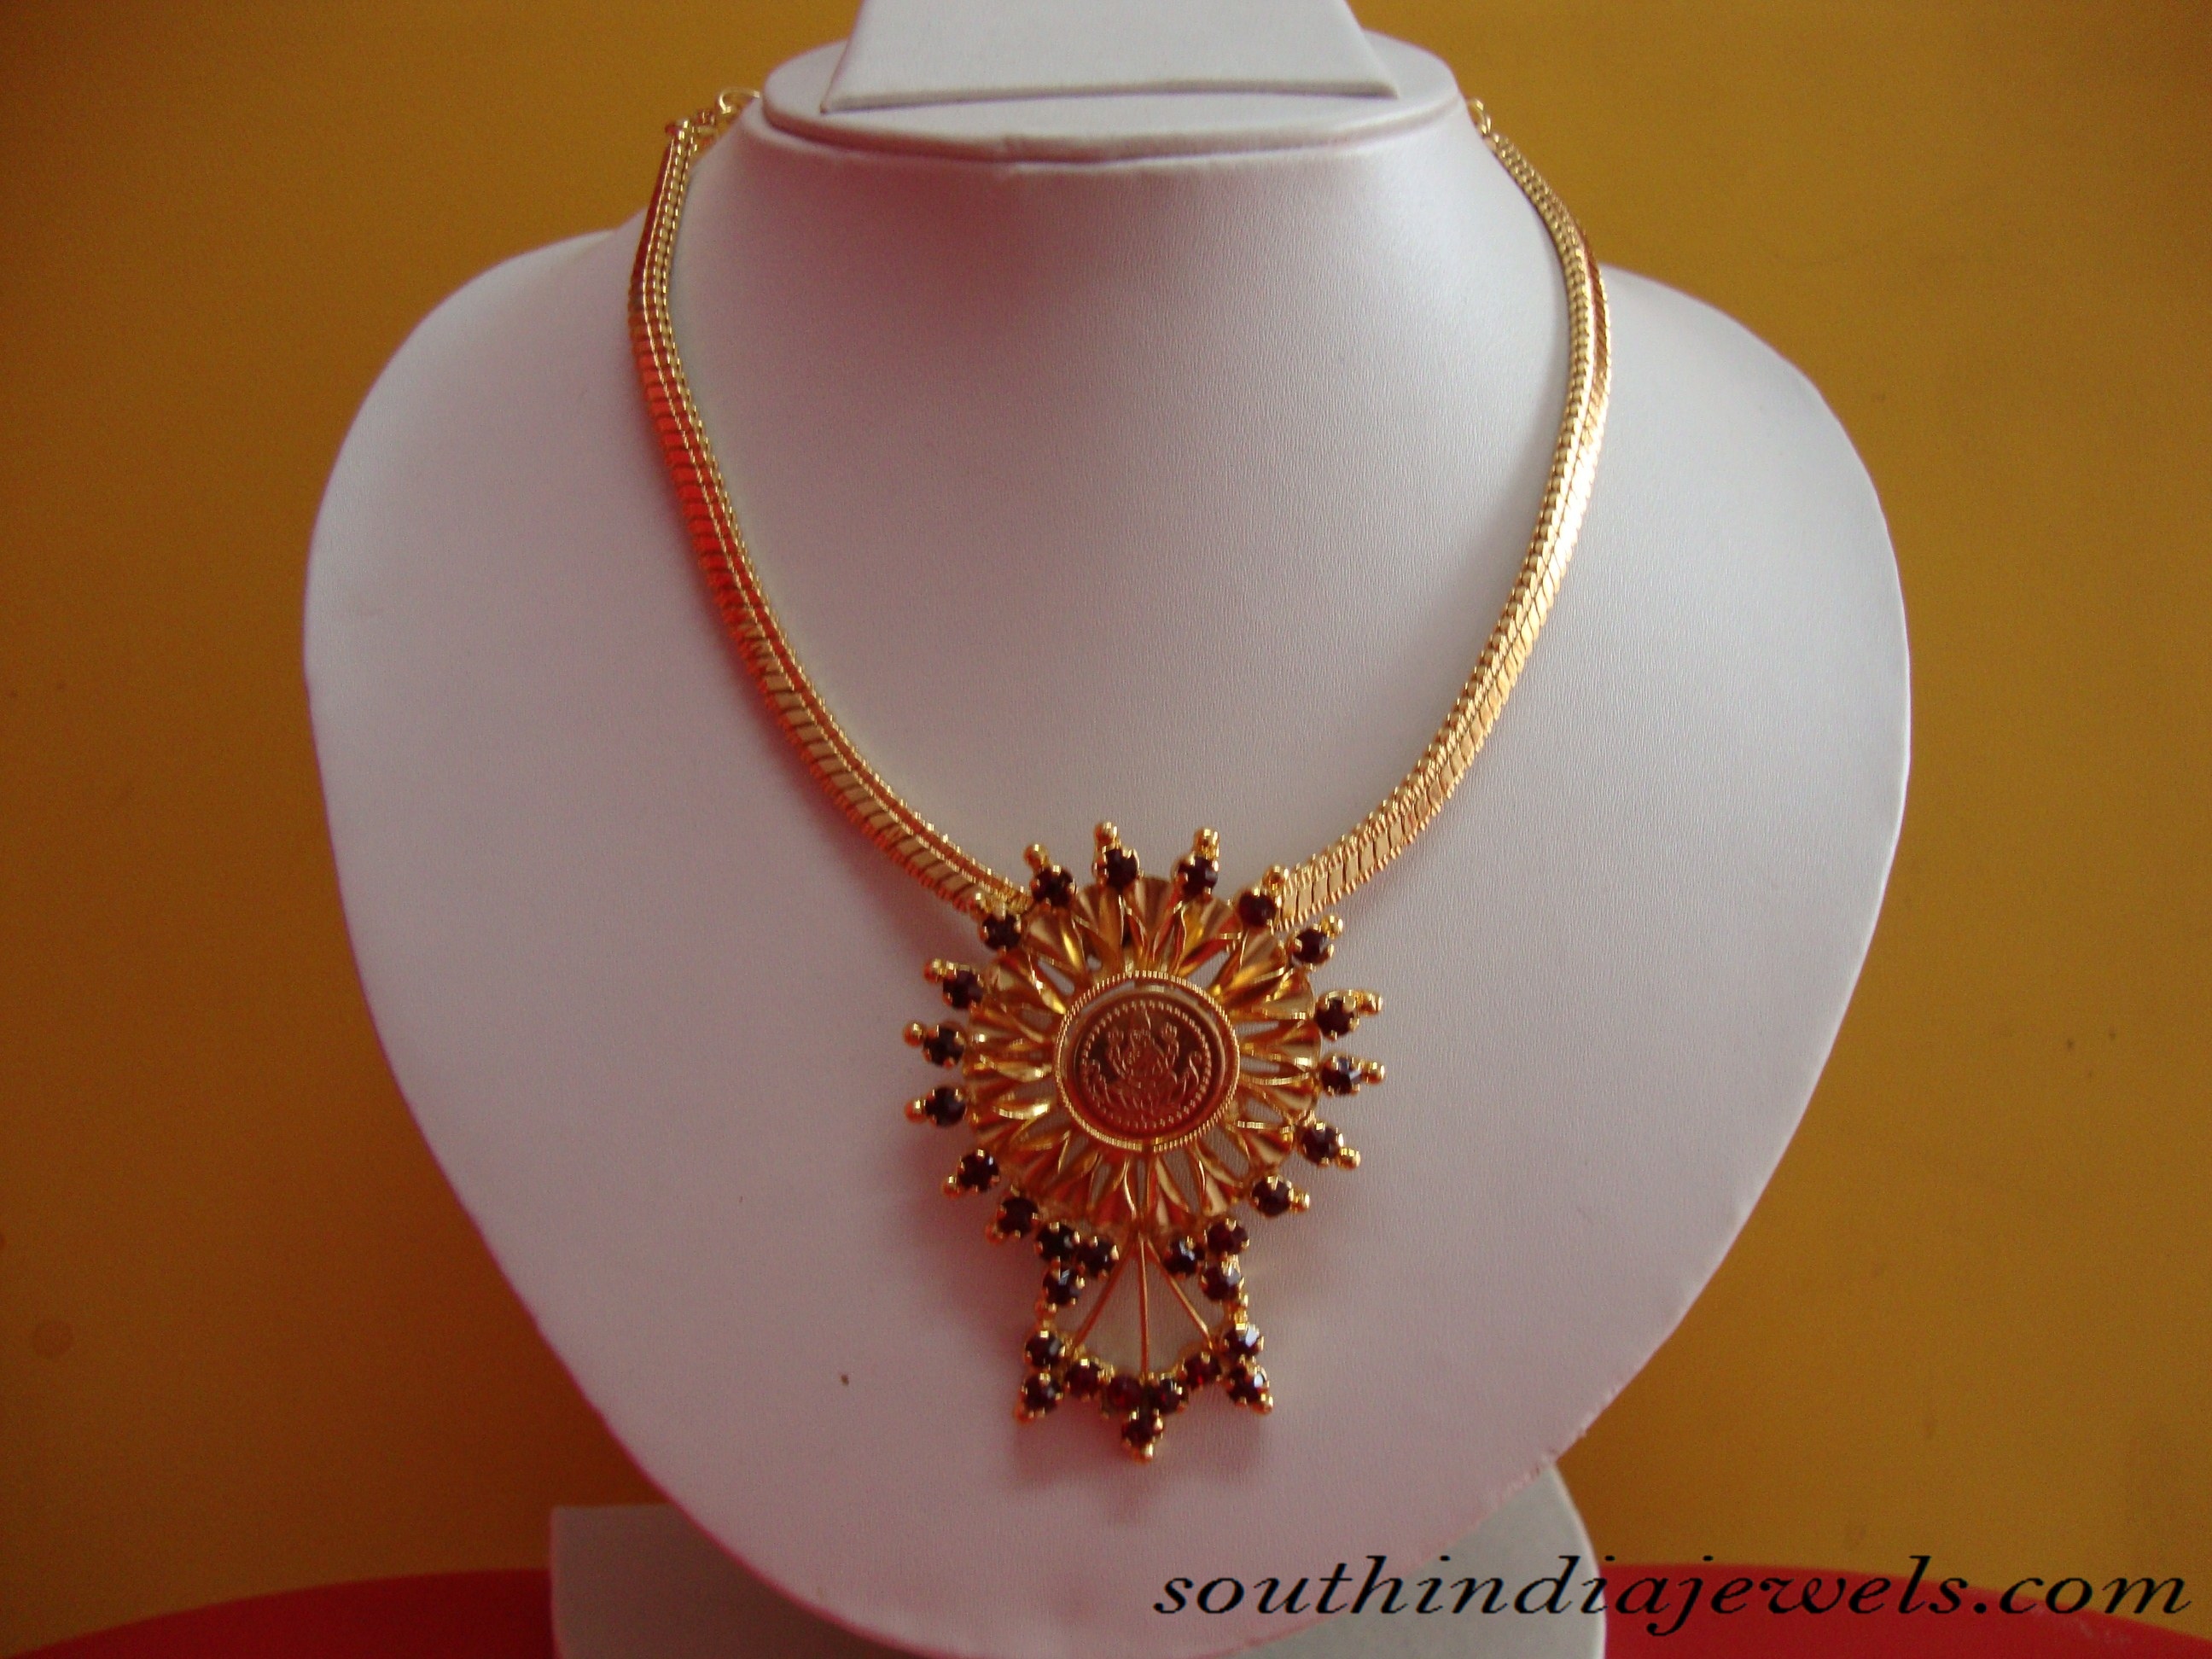 Traditional gold jewelry necklace - South India Jewels